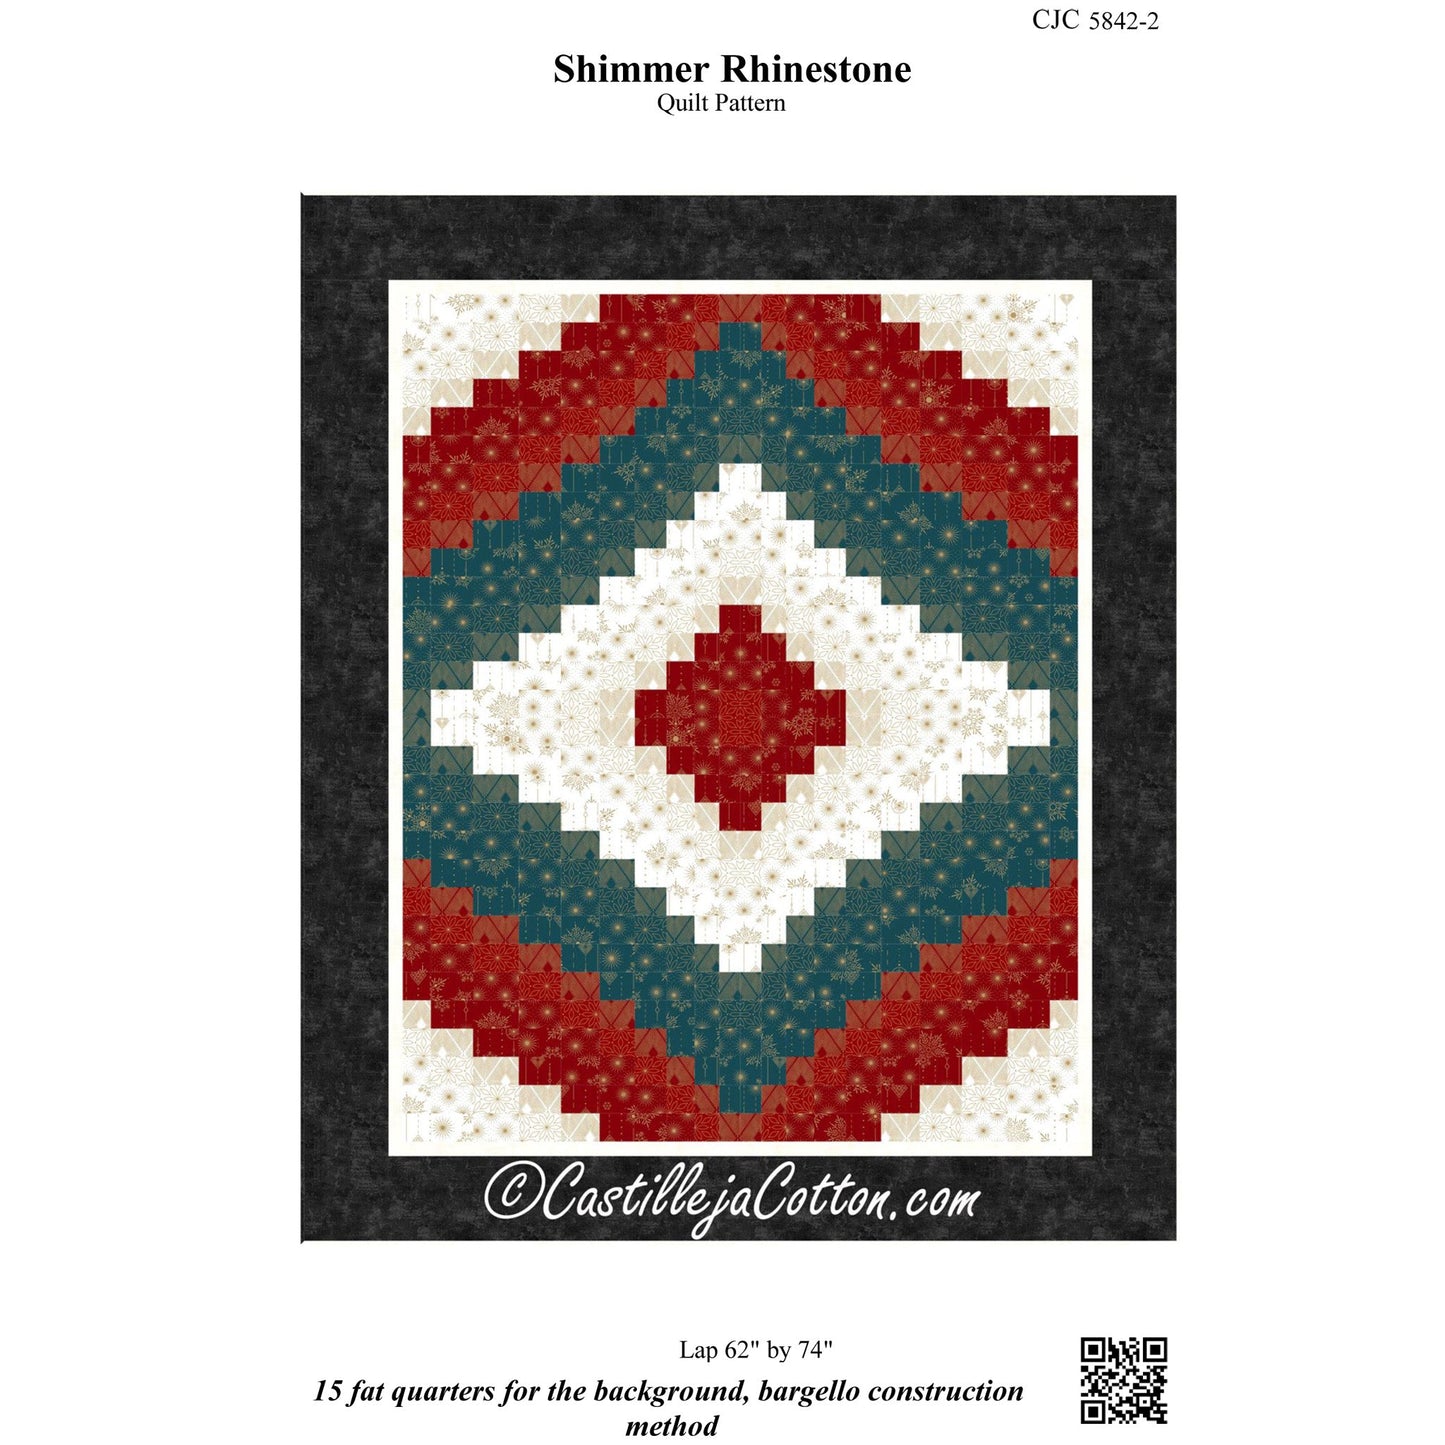 Cover image of pattern for Shimmer Rhinestone Quilt.